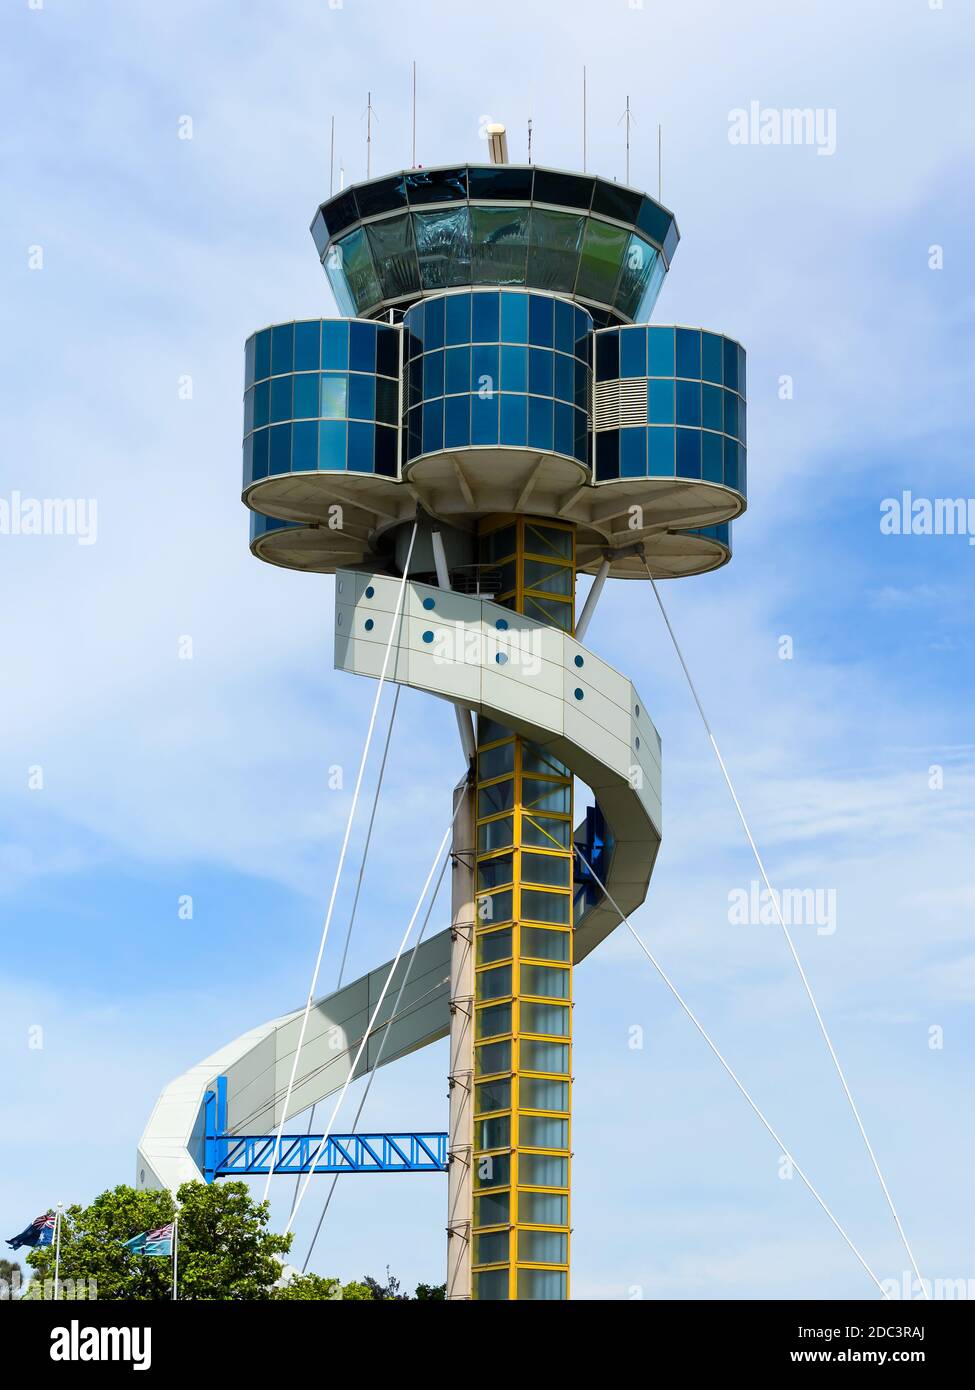 Air Traffic Control Tower of Sydney International Airport. ATC Tower of SYD Kingsford Smith / Mascot Airport in Australia. Stock Photo